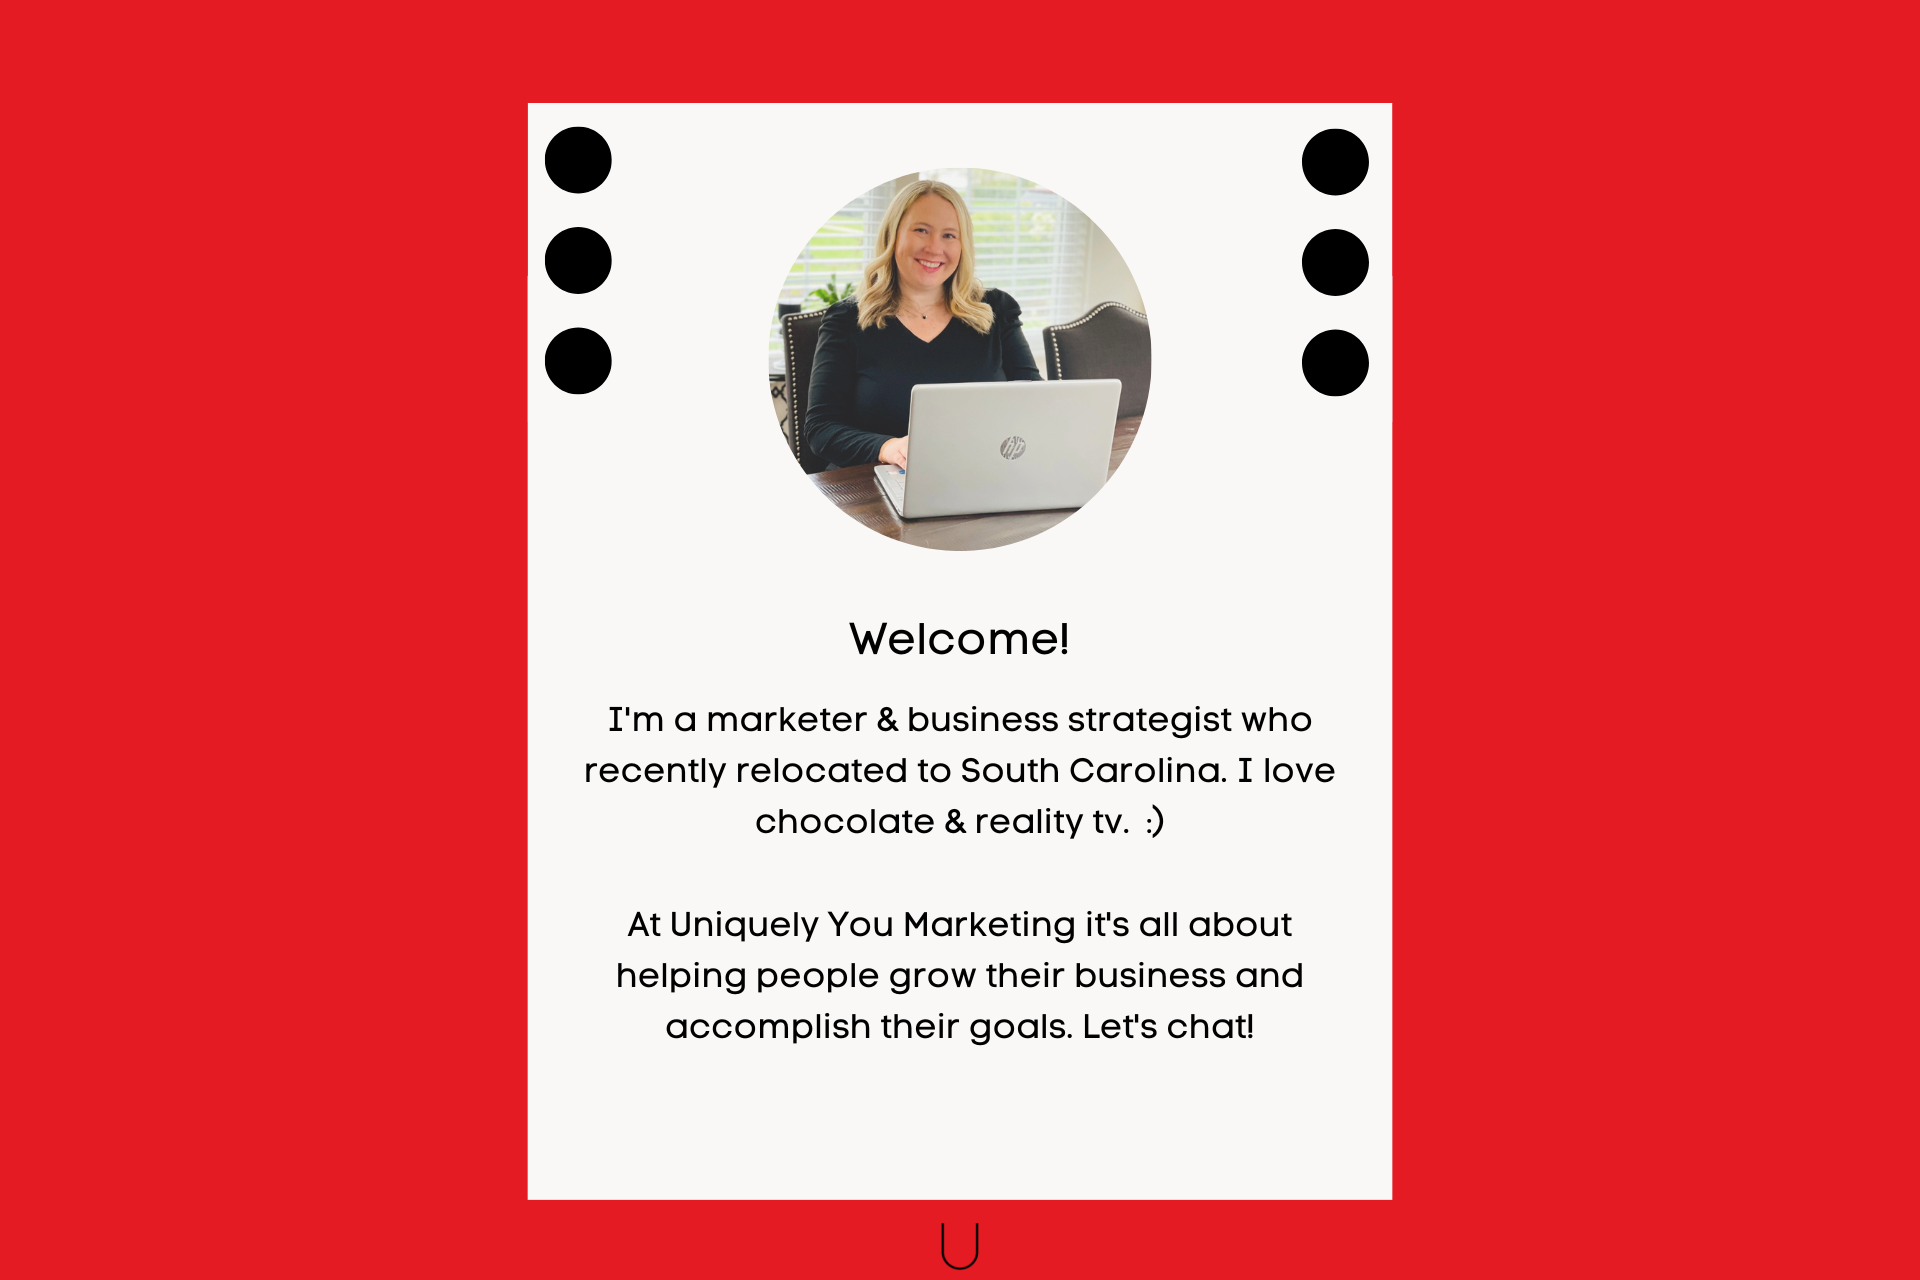 Welcome! I'm a marketer & business strategist who recently relocated to South Carolina. I love chocolate & reality tv.  :)  At Uniquely You Marketing it's all about helping people grow their business and accomplish their goals. Let's chat!